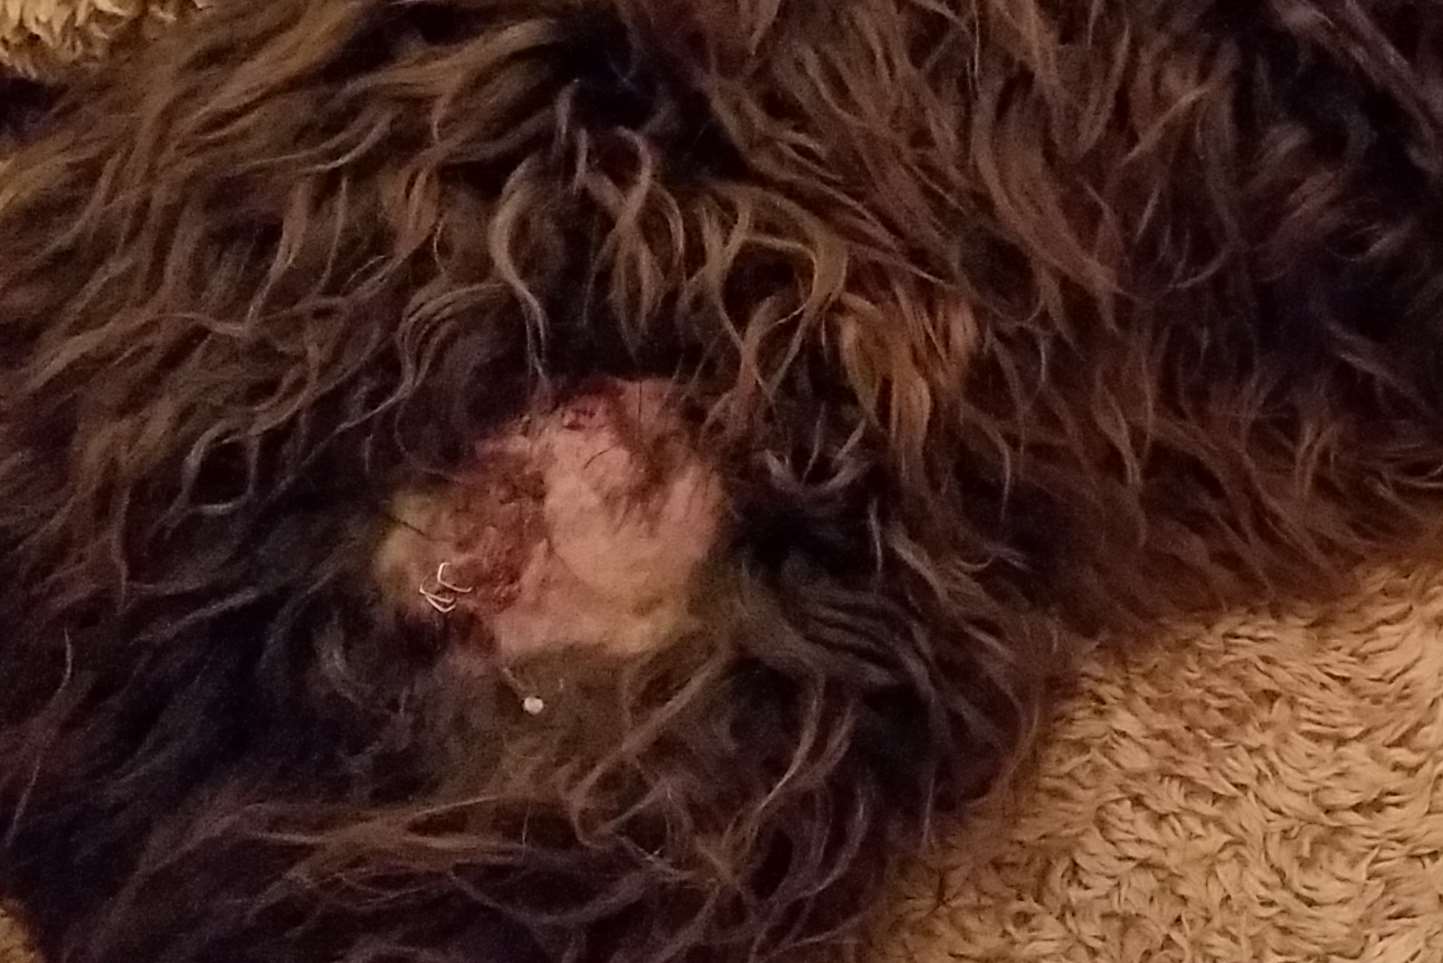 A close up of Lola's wound